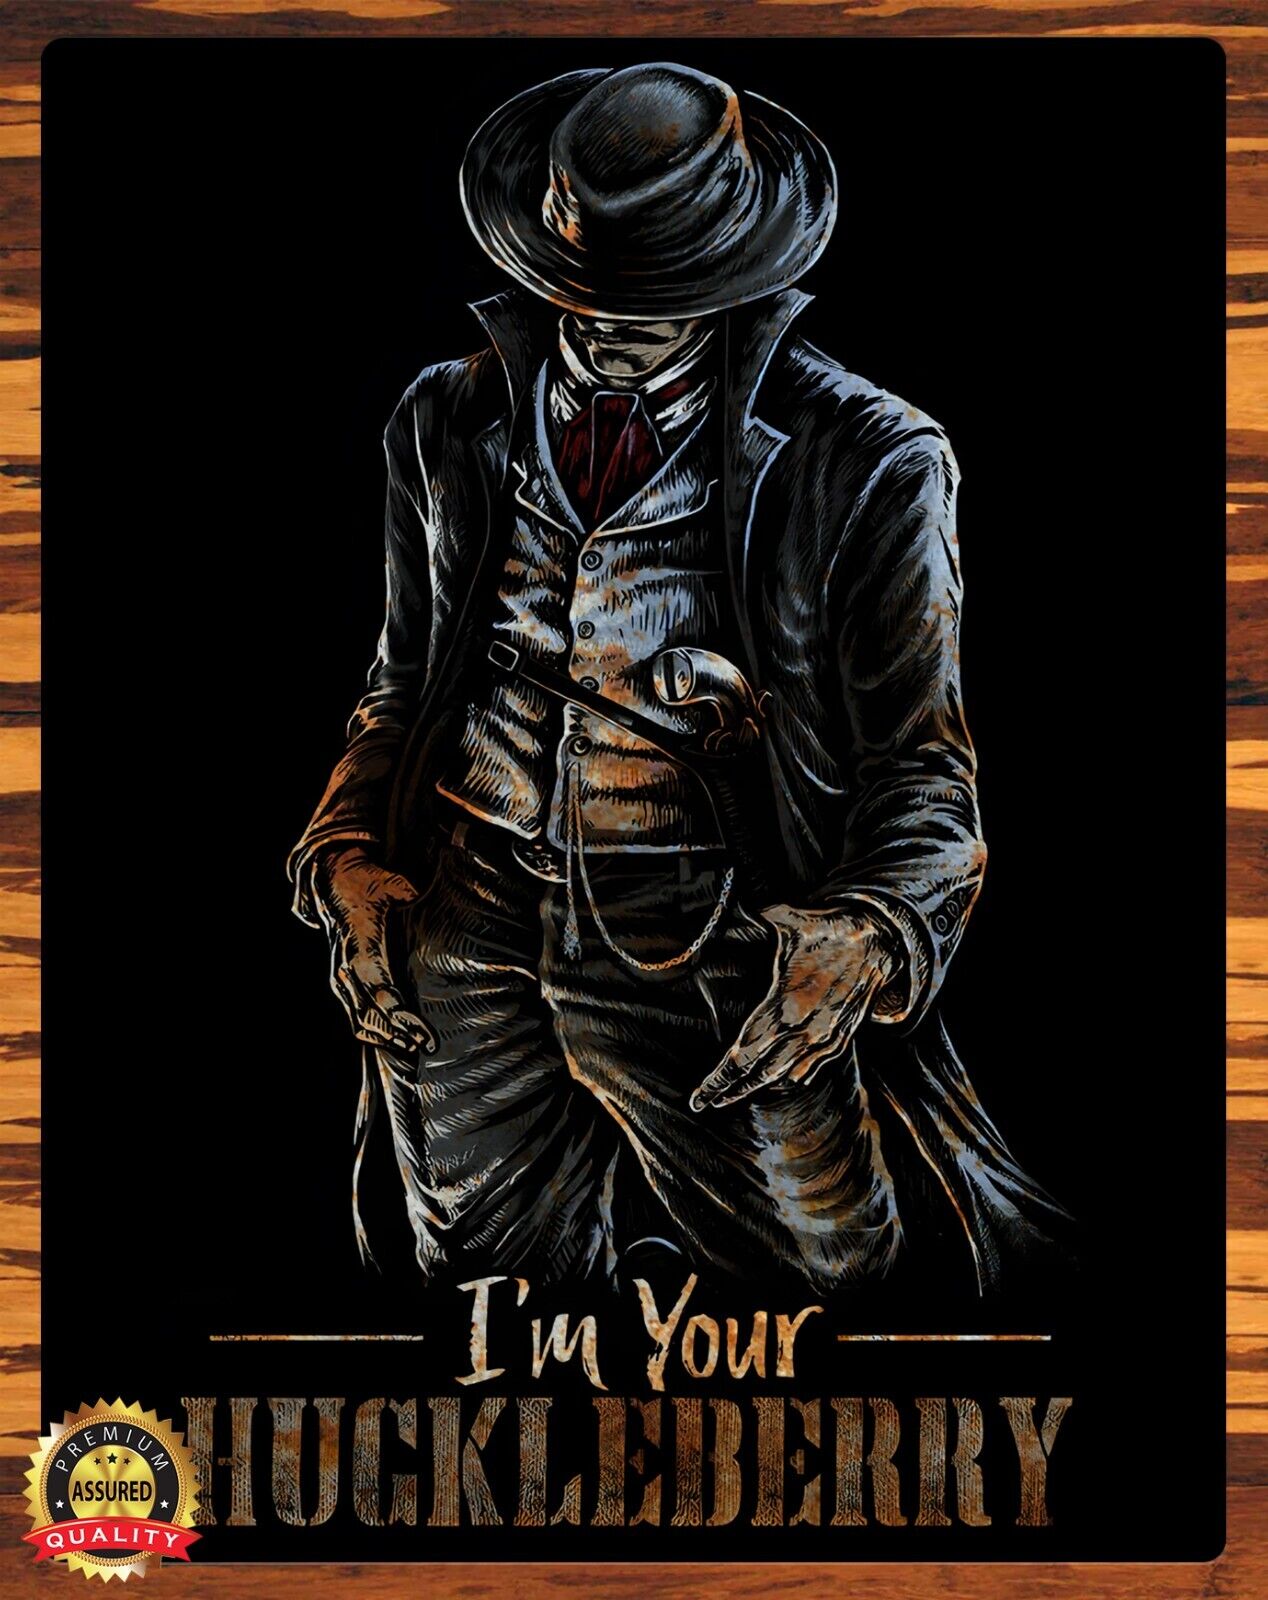 Tombstone - I'm Your Huckleberry - Metal Sign 11 x 14